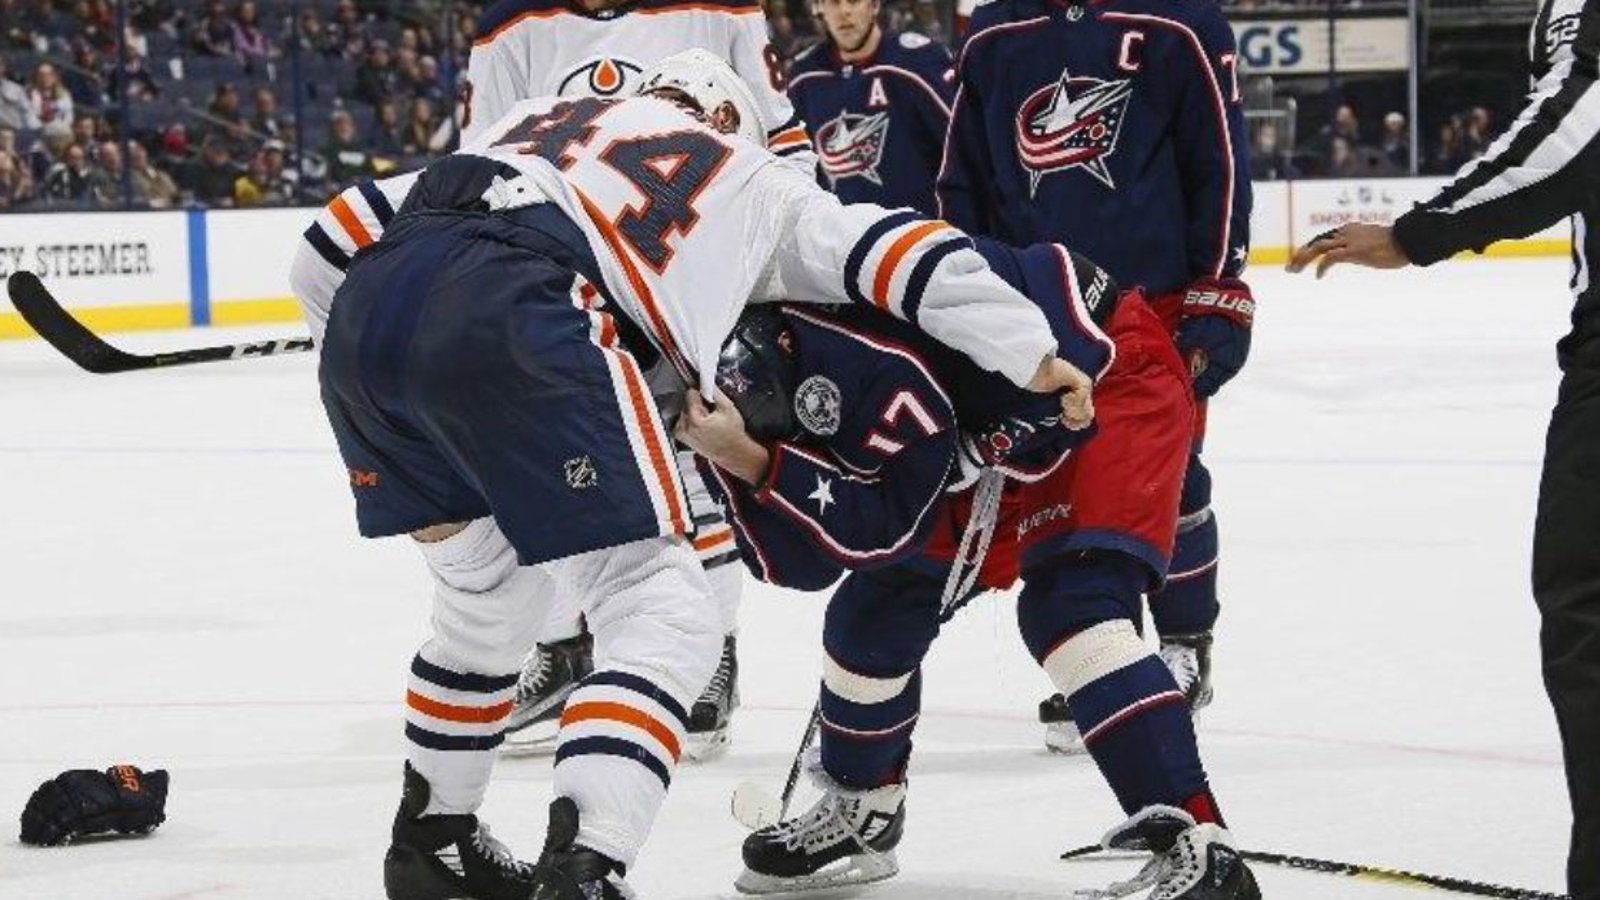 Breaking: Devastating news for Jackets and Dubinsky after last-minute brawl